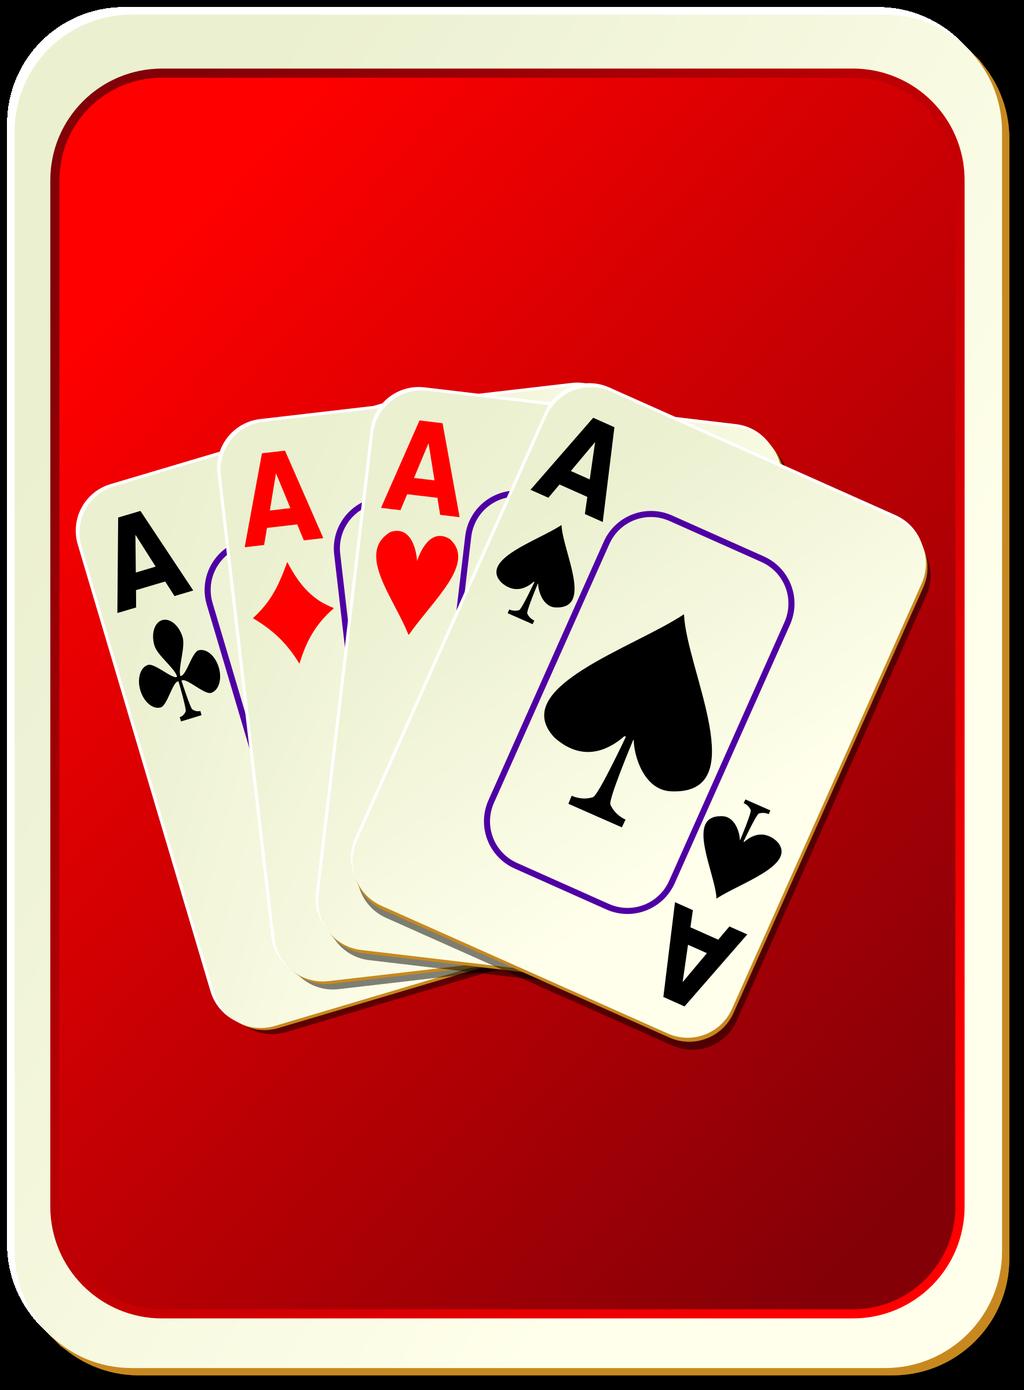 9. Now ask the spectator to pick 1 card from each group If they pick their card, keep both cards they picked and remove the other two cards If they do not pick their card, discard